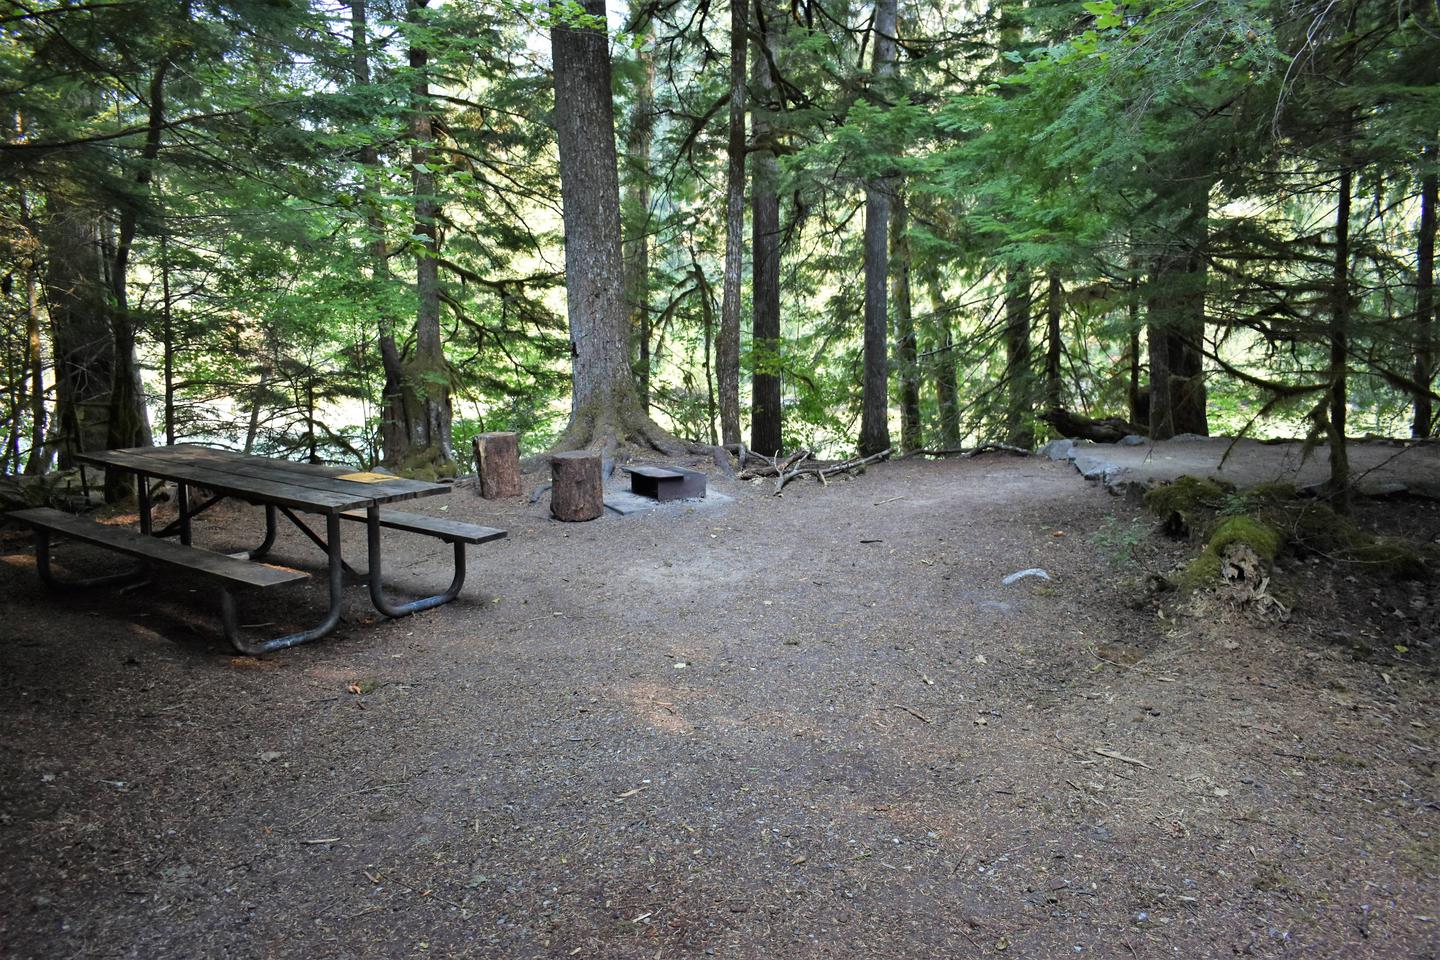 Picnic table, fire ring, and tent pad with river in distanceView of campsite